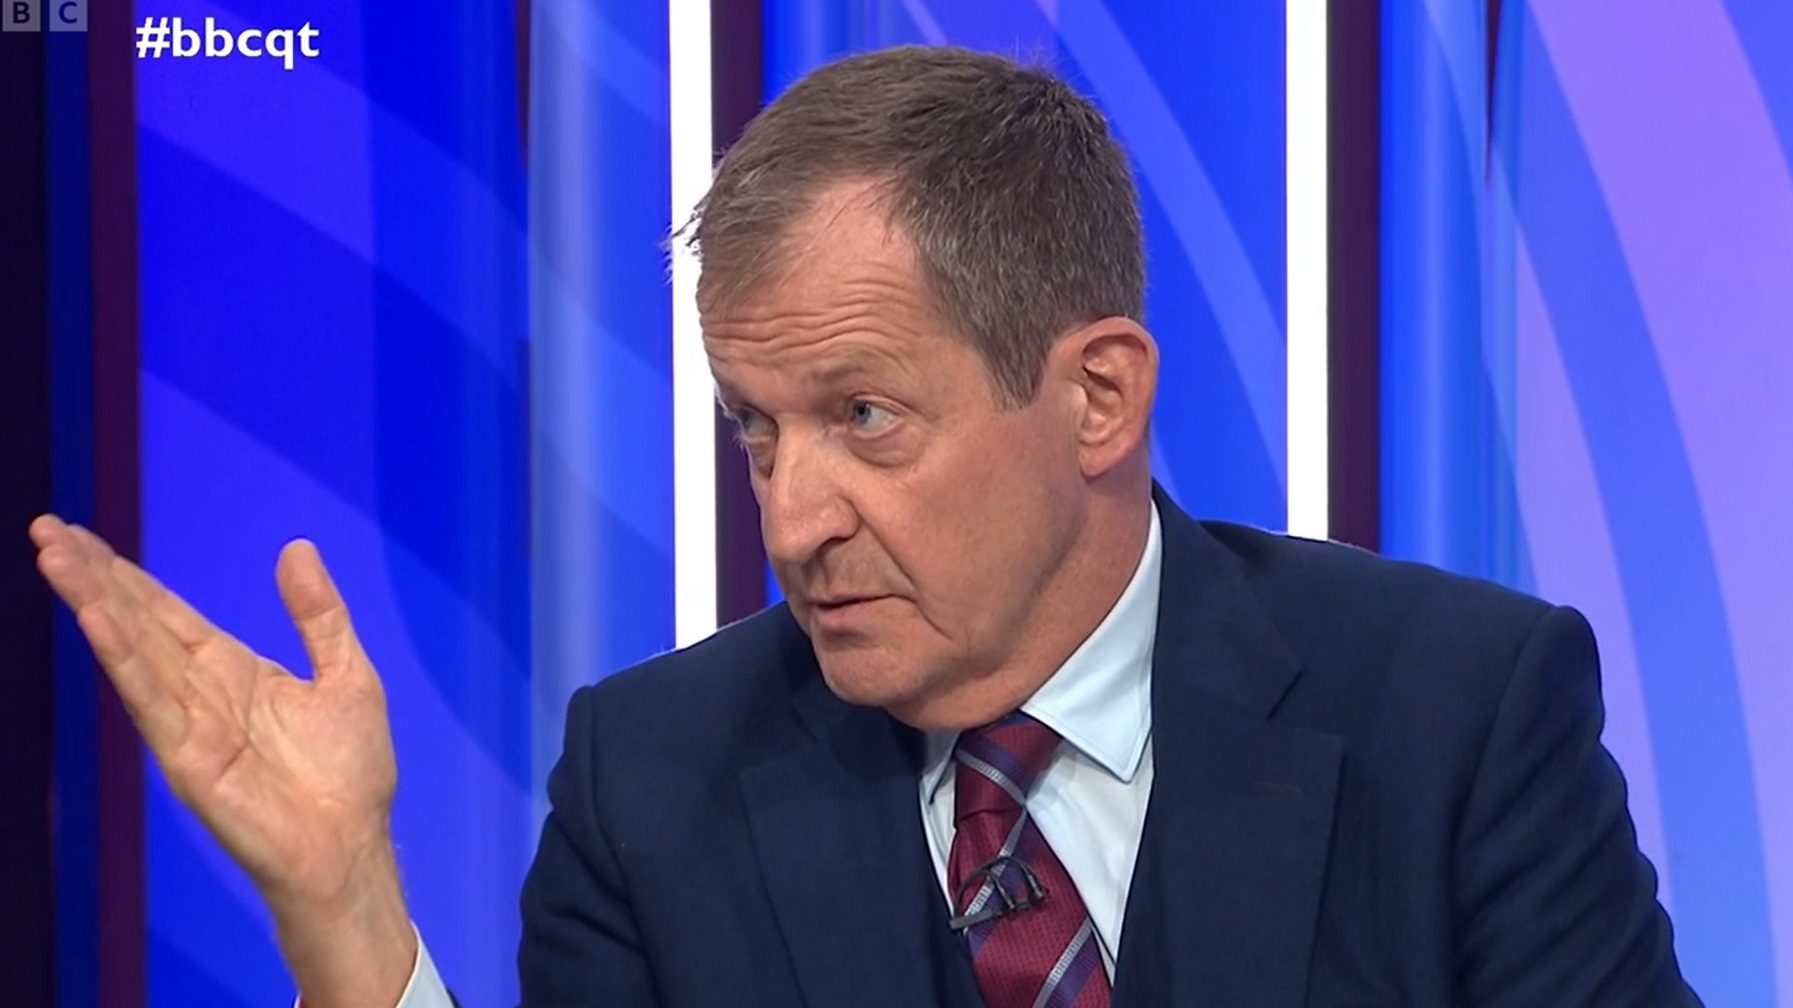 Alastair Campbell on Question Time. Image: BBC